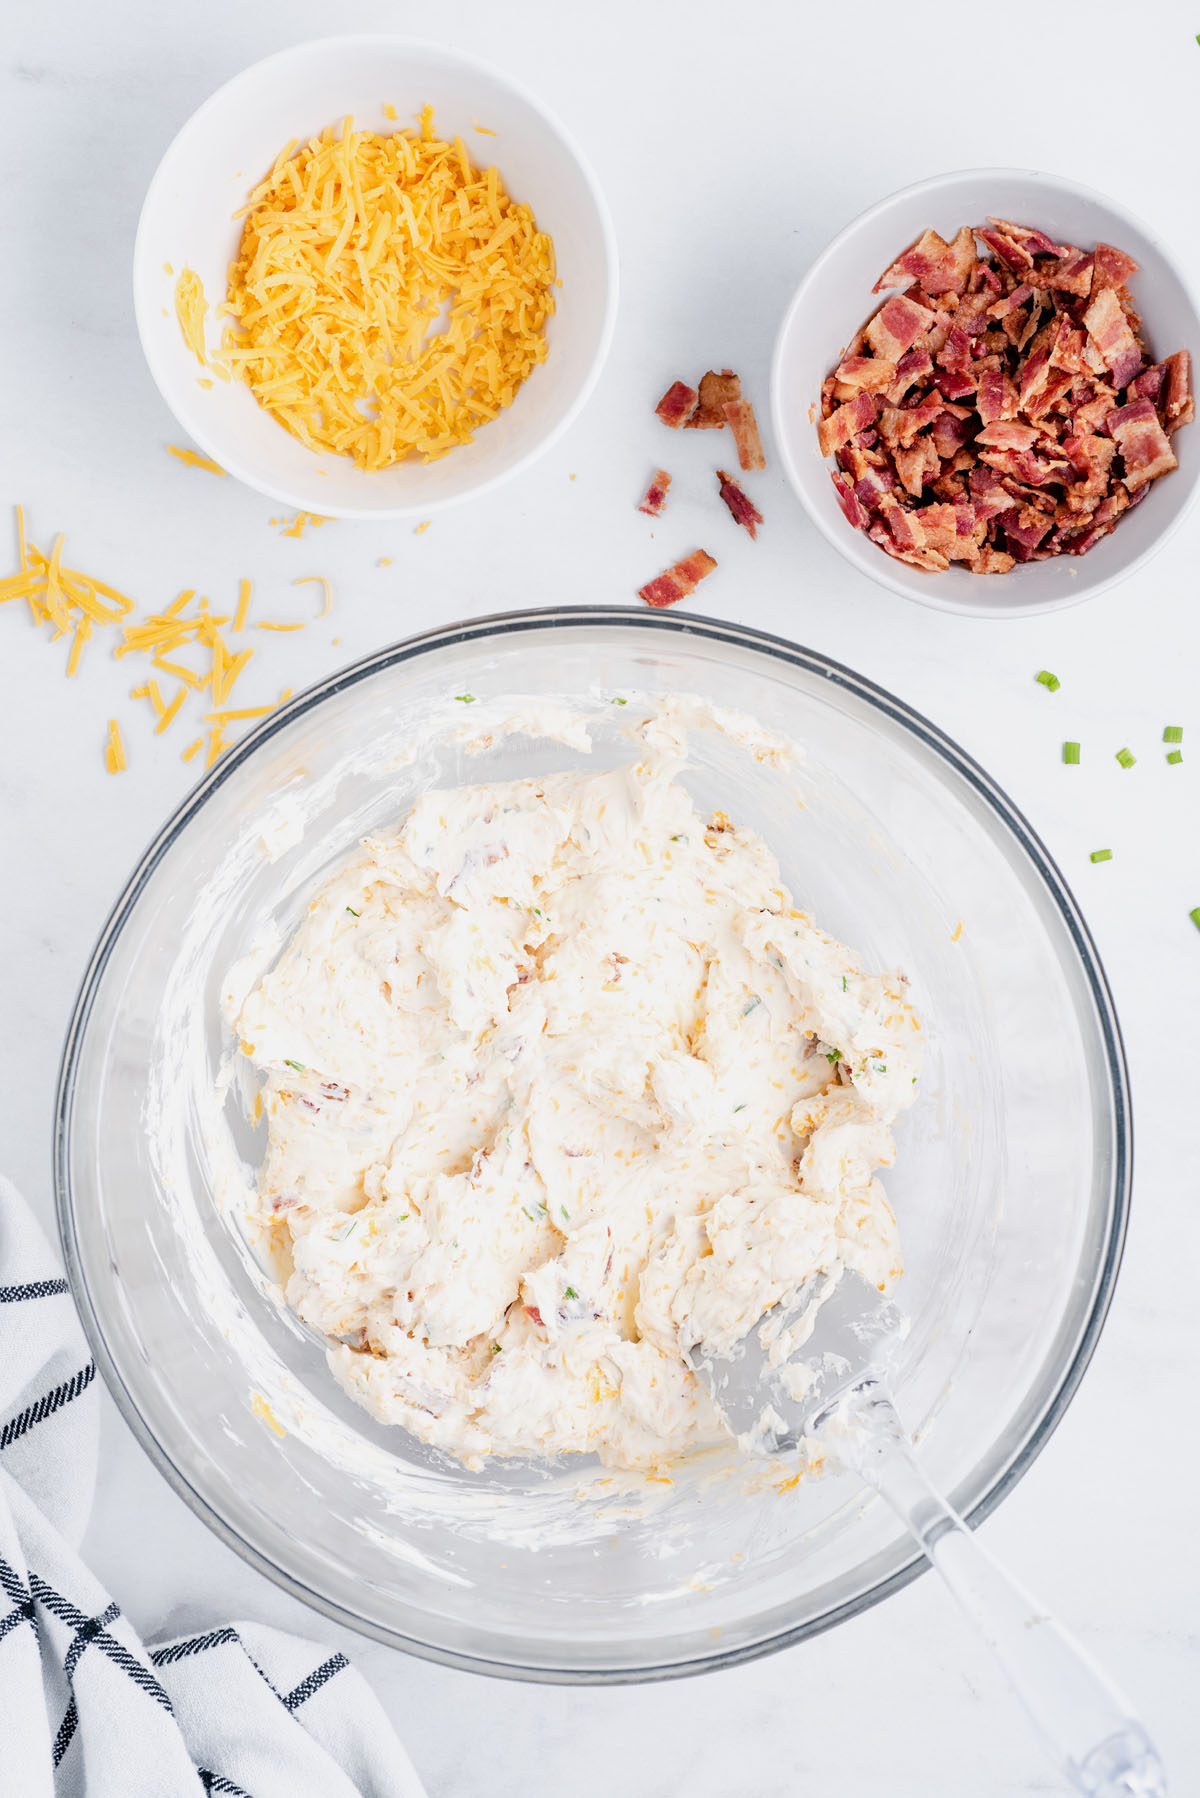 Fold cheddar cheese and ½ cup of the bacon crumbles into the cream cheese mixture 